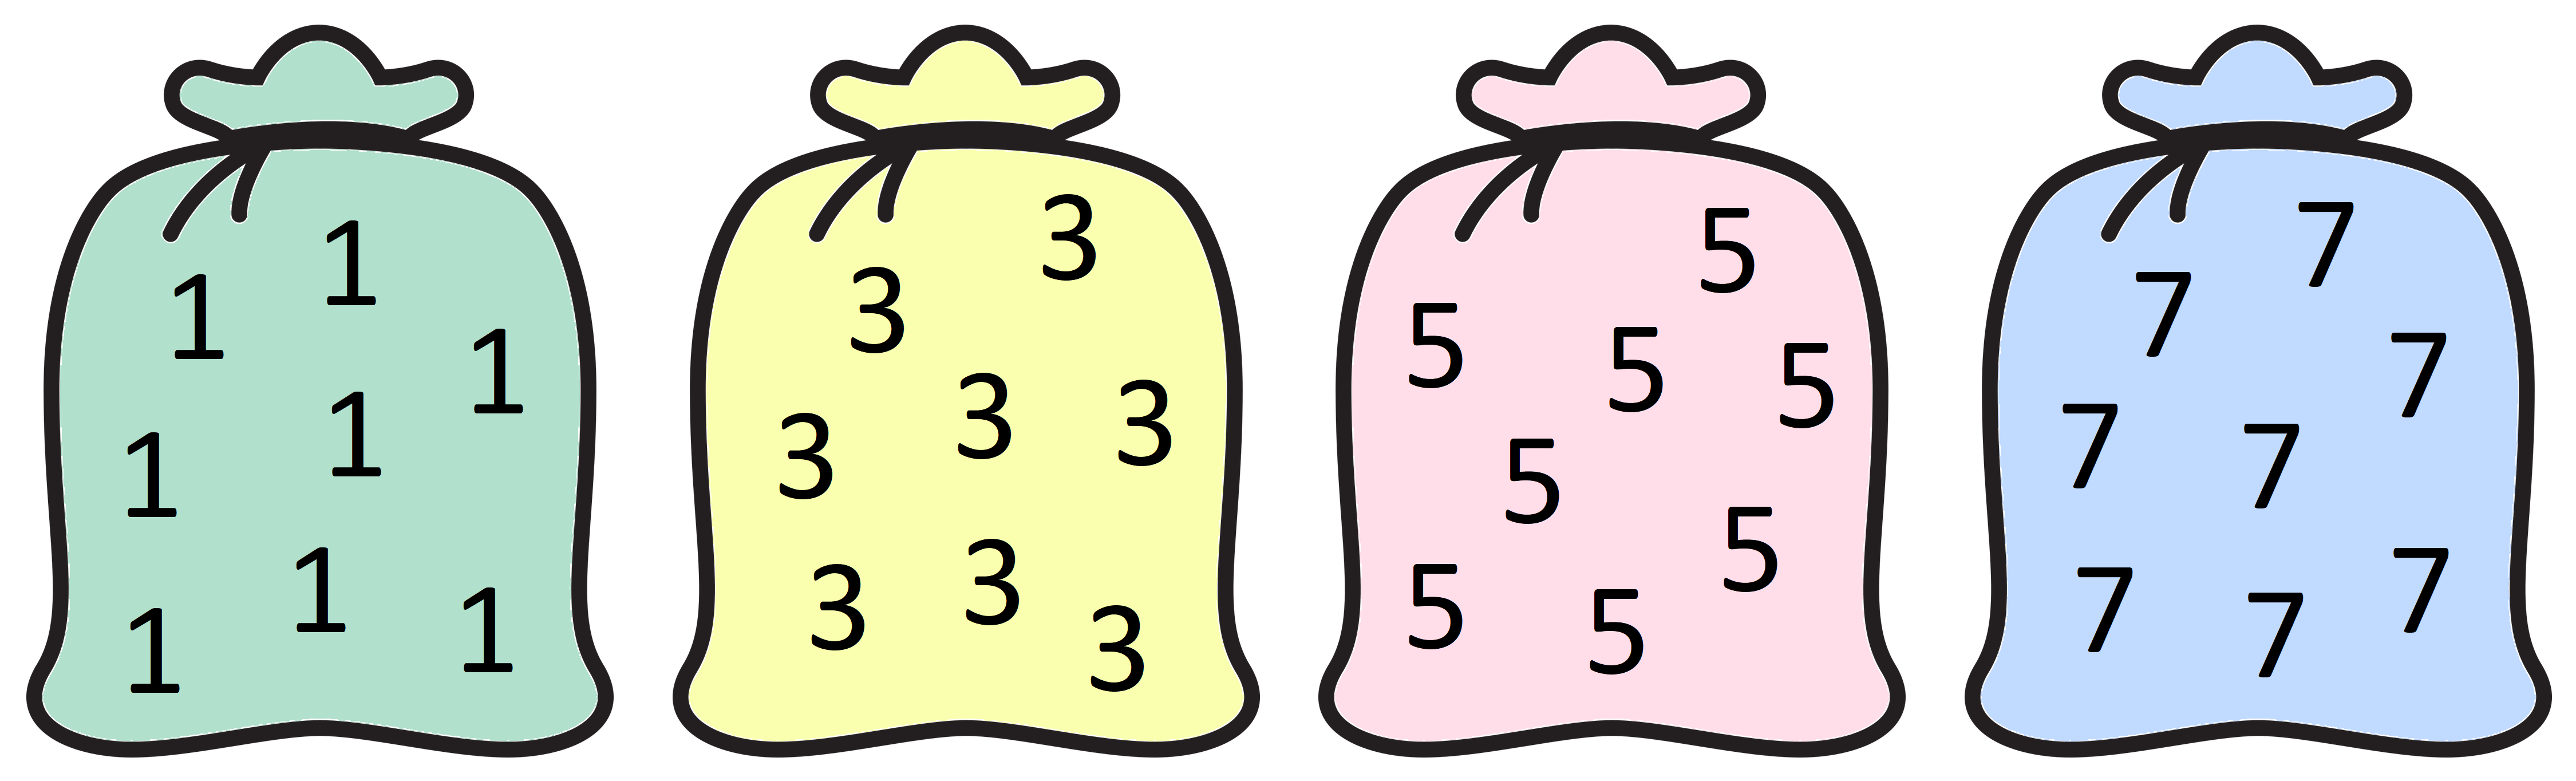 First bag contains eight 1s; second bag contains eight 3s; third bag contains eight 5s; fourth bag contains eight 7s